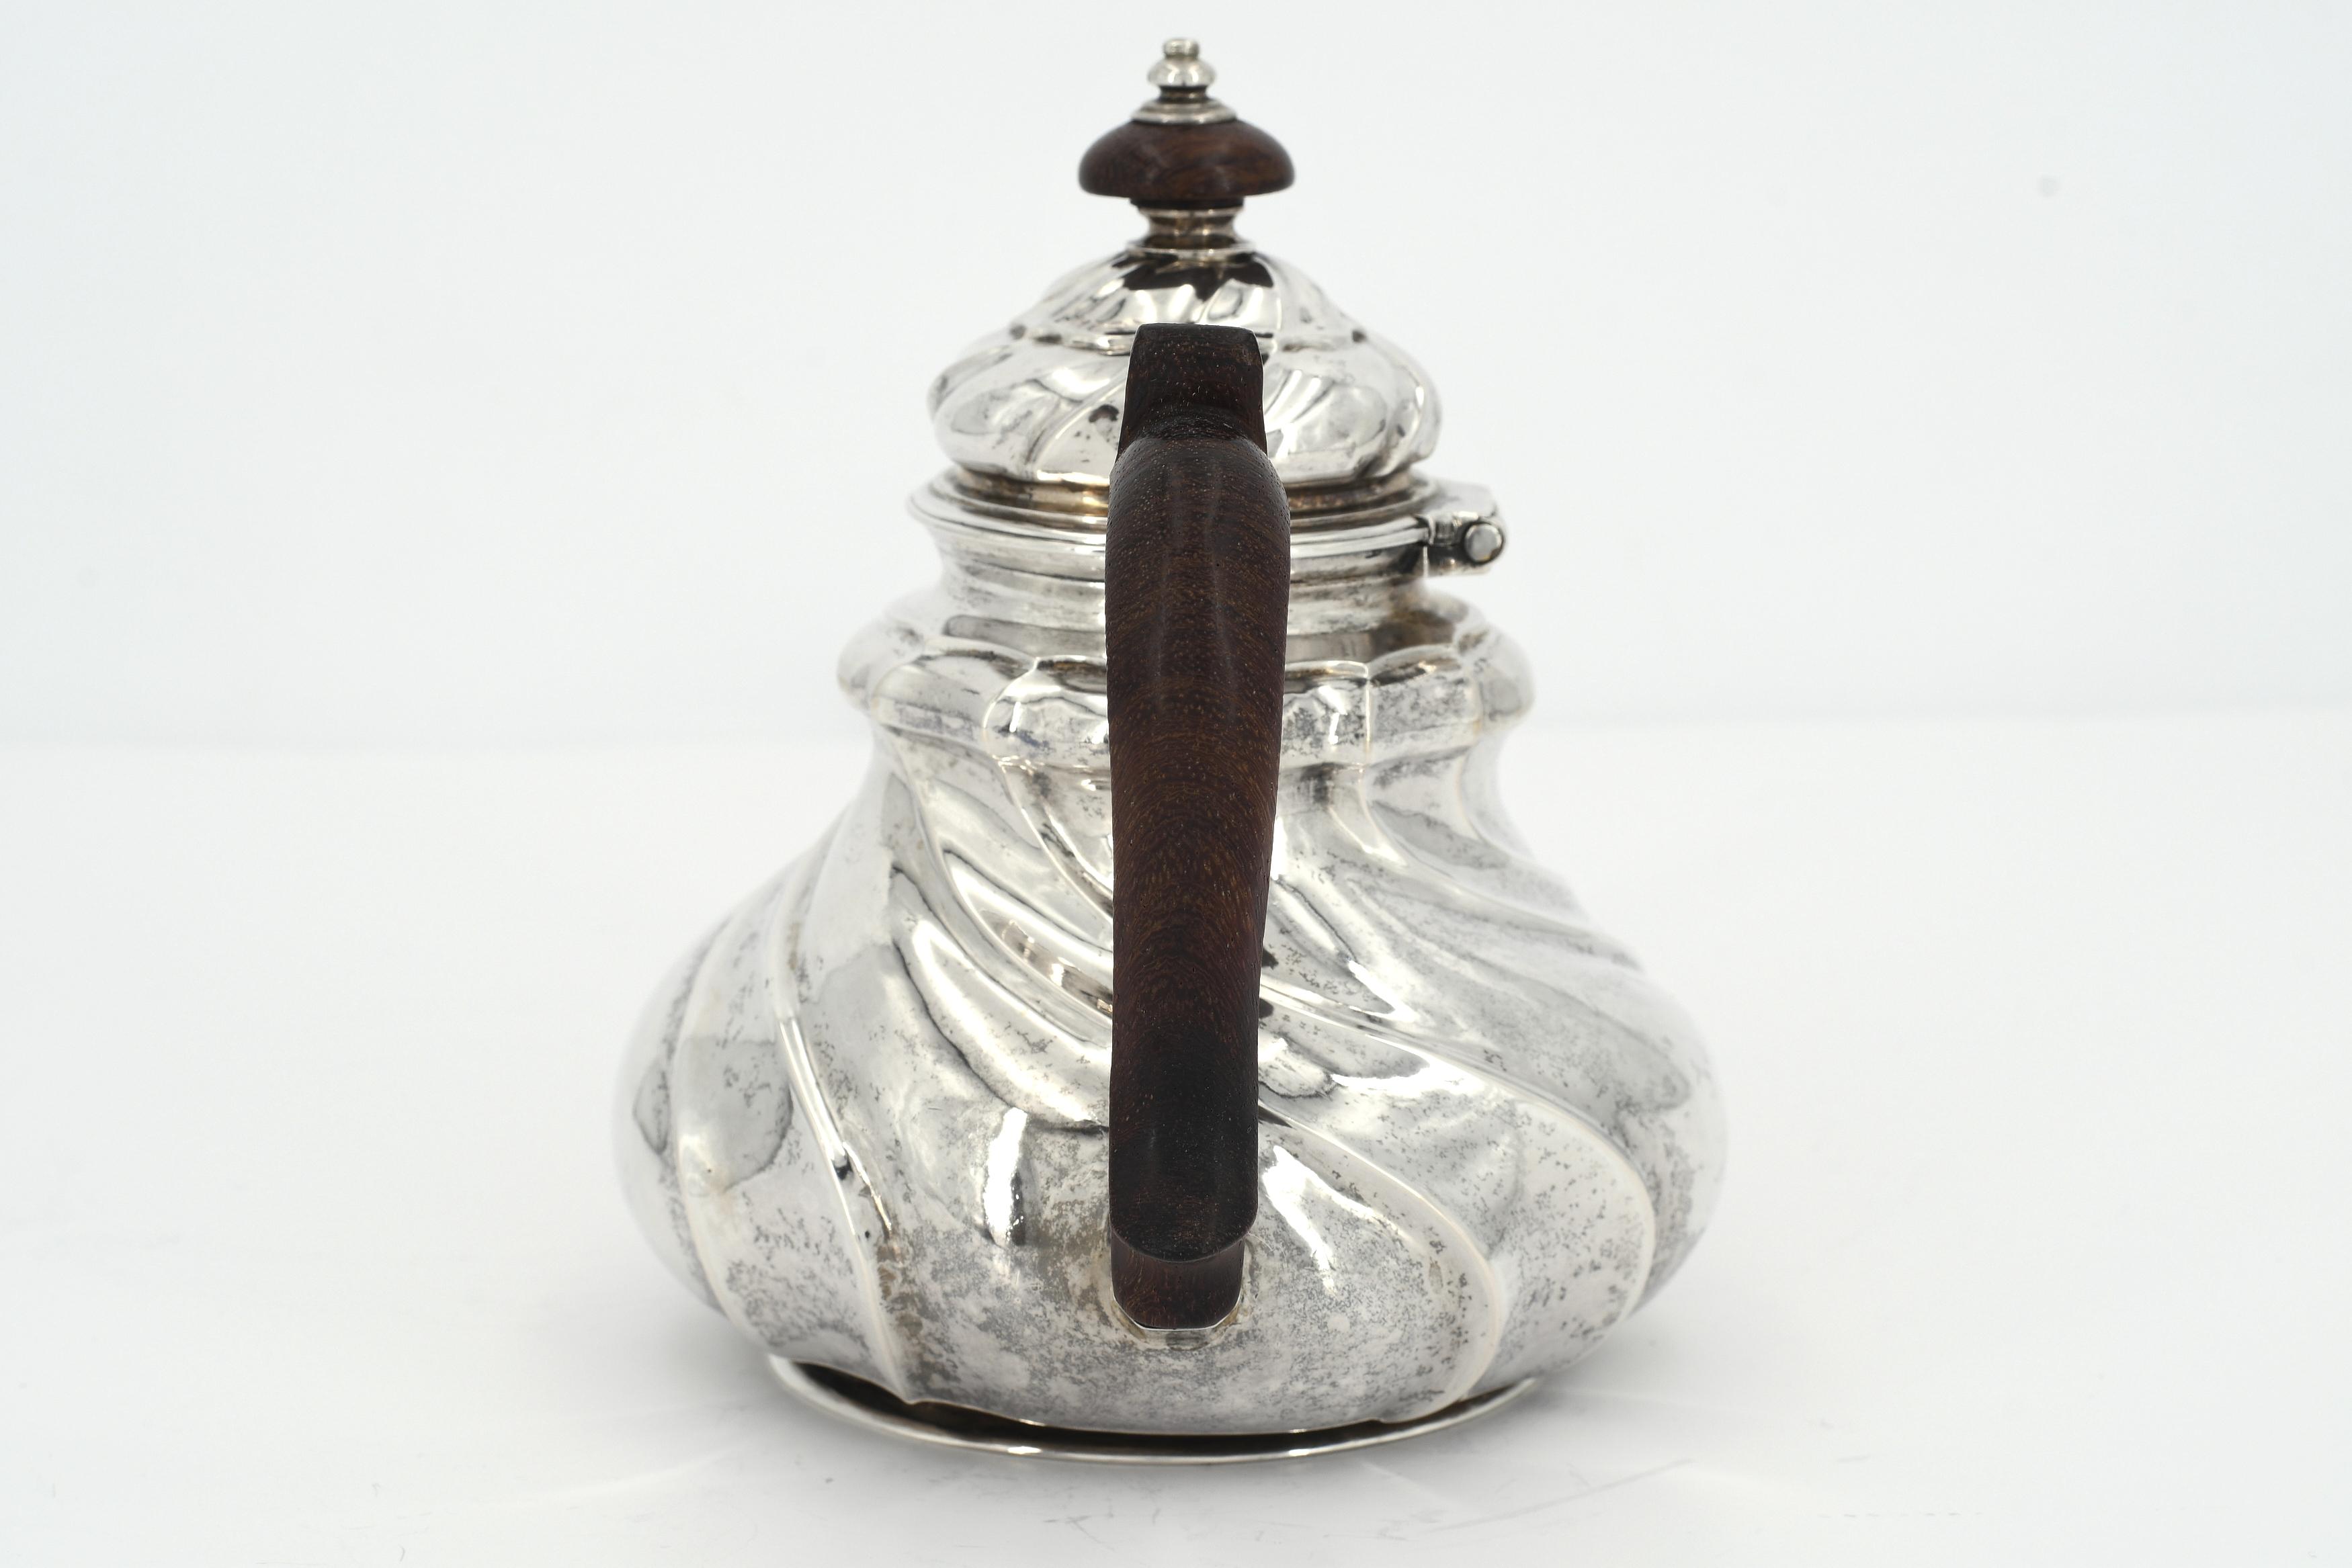 SILVER TEAPOT WITH TWIST-FLUTED FEATURES. - Image 4 of 6